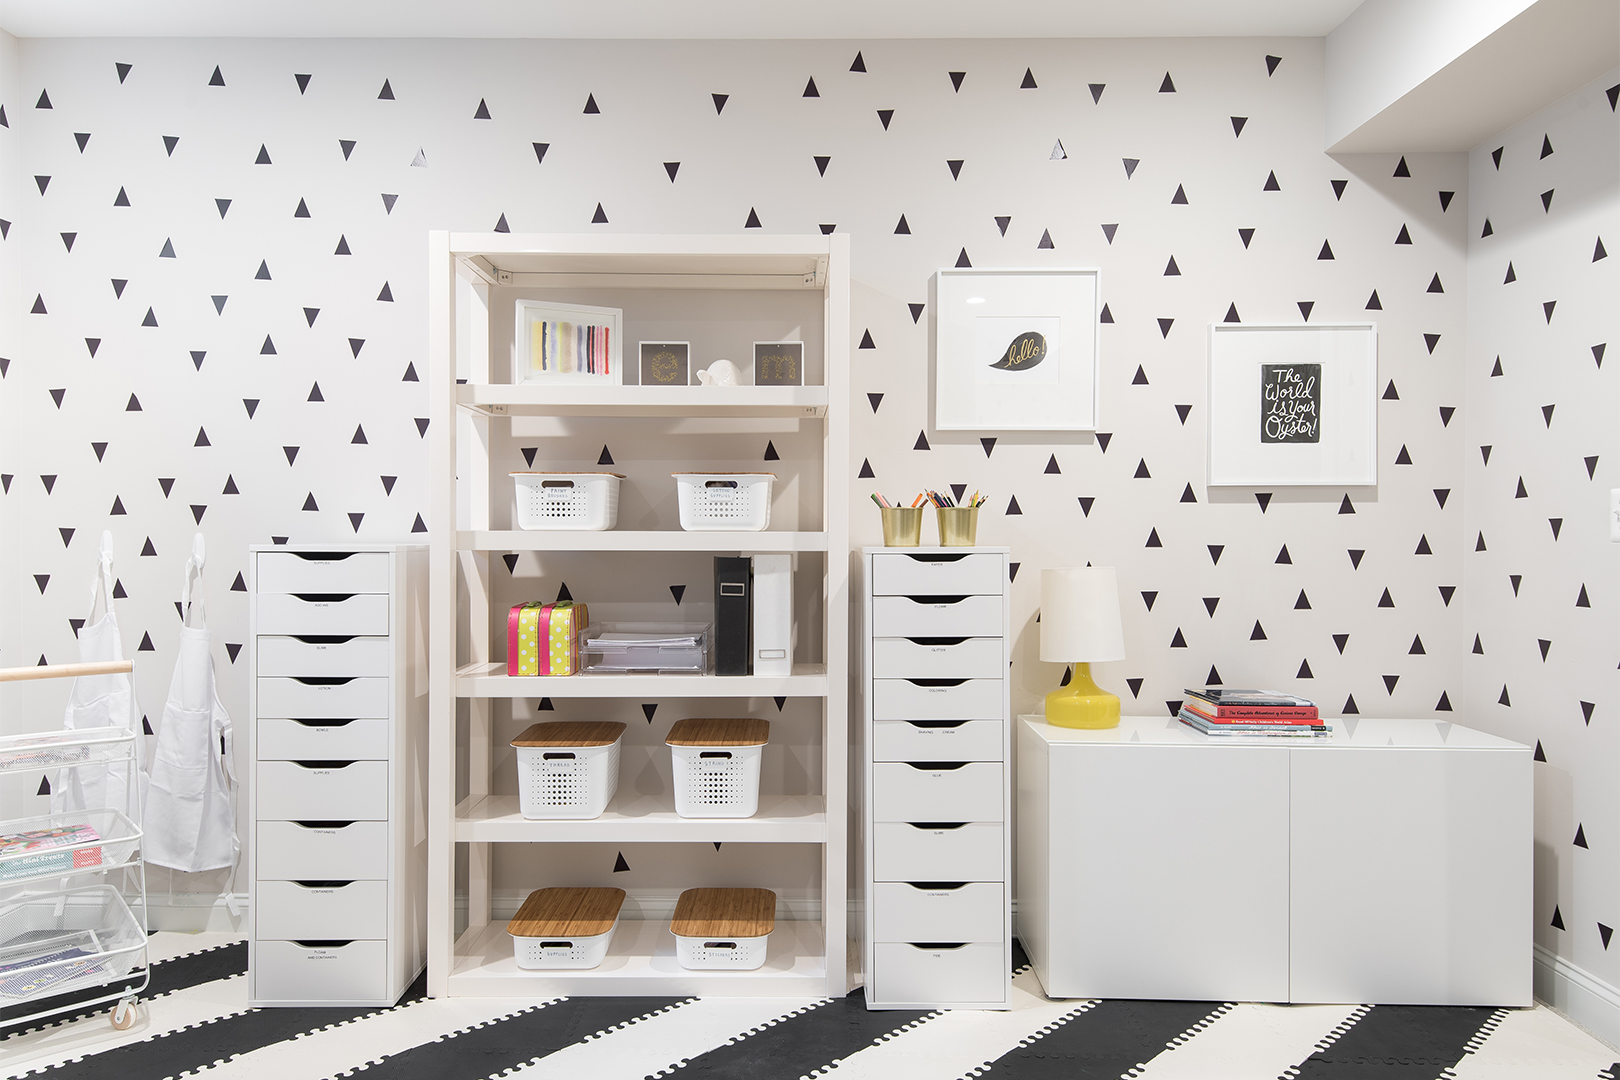 black and white wallpaper and shelves fro kids crafts